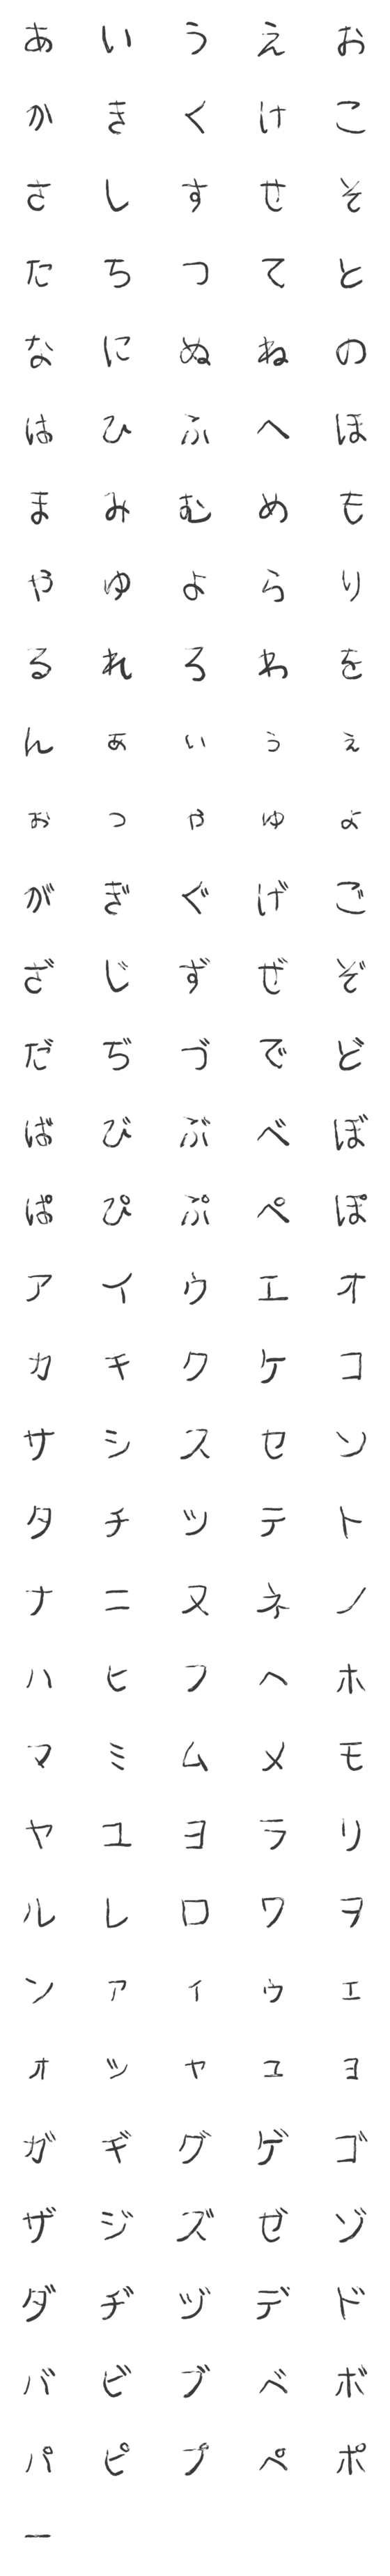 [LINE絵文字]つかえる毛筆文字の画像一覧